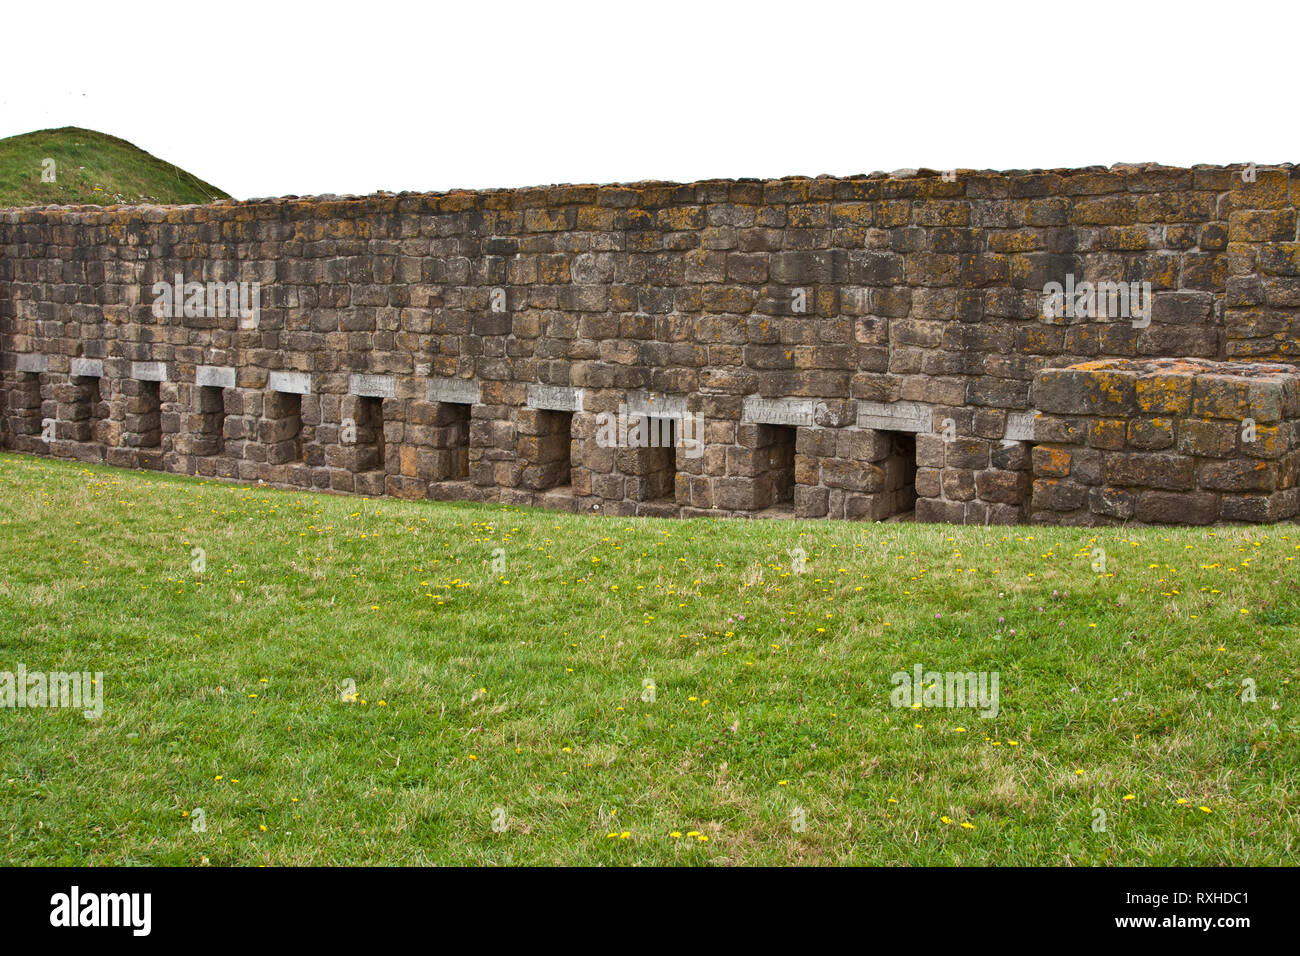 Canada, New Brunswick, Fort Beausejour, Fort Cumberland, French, British, 1755, French and Indian War, Seven Years War, Stock Photo